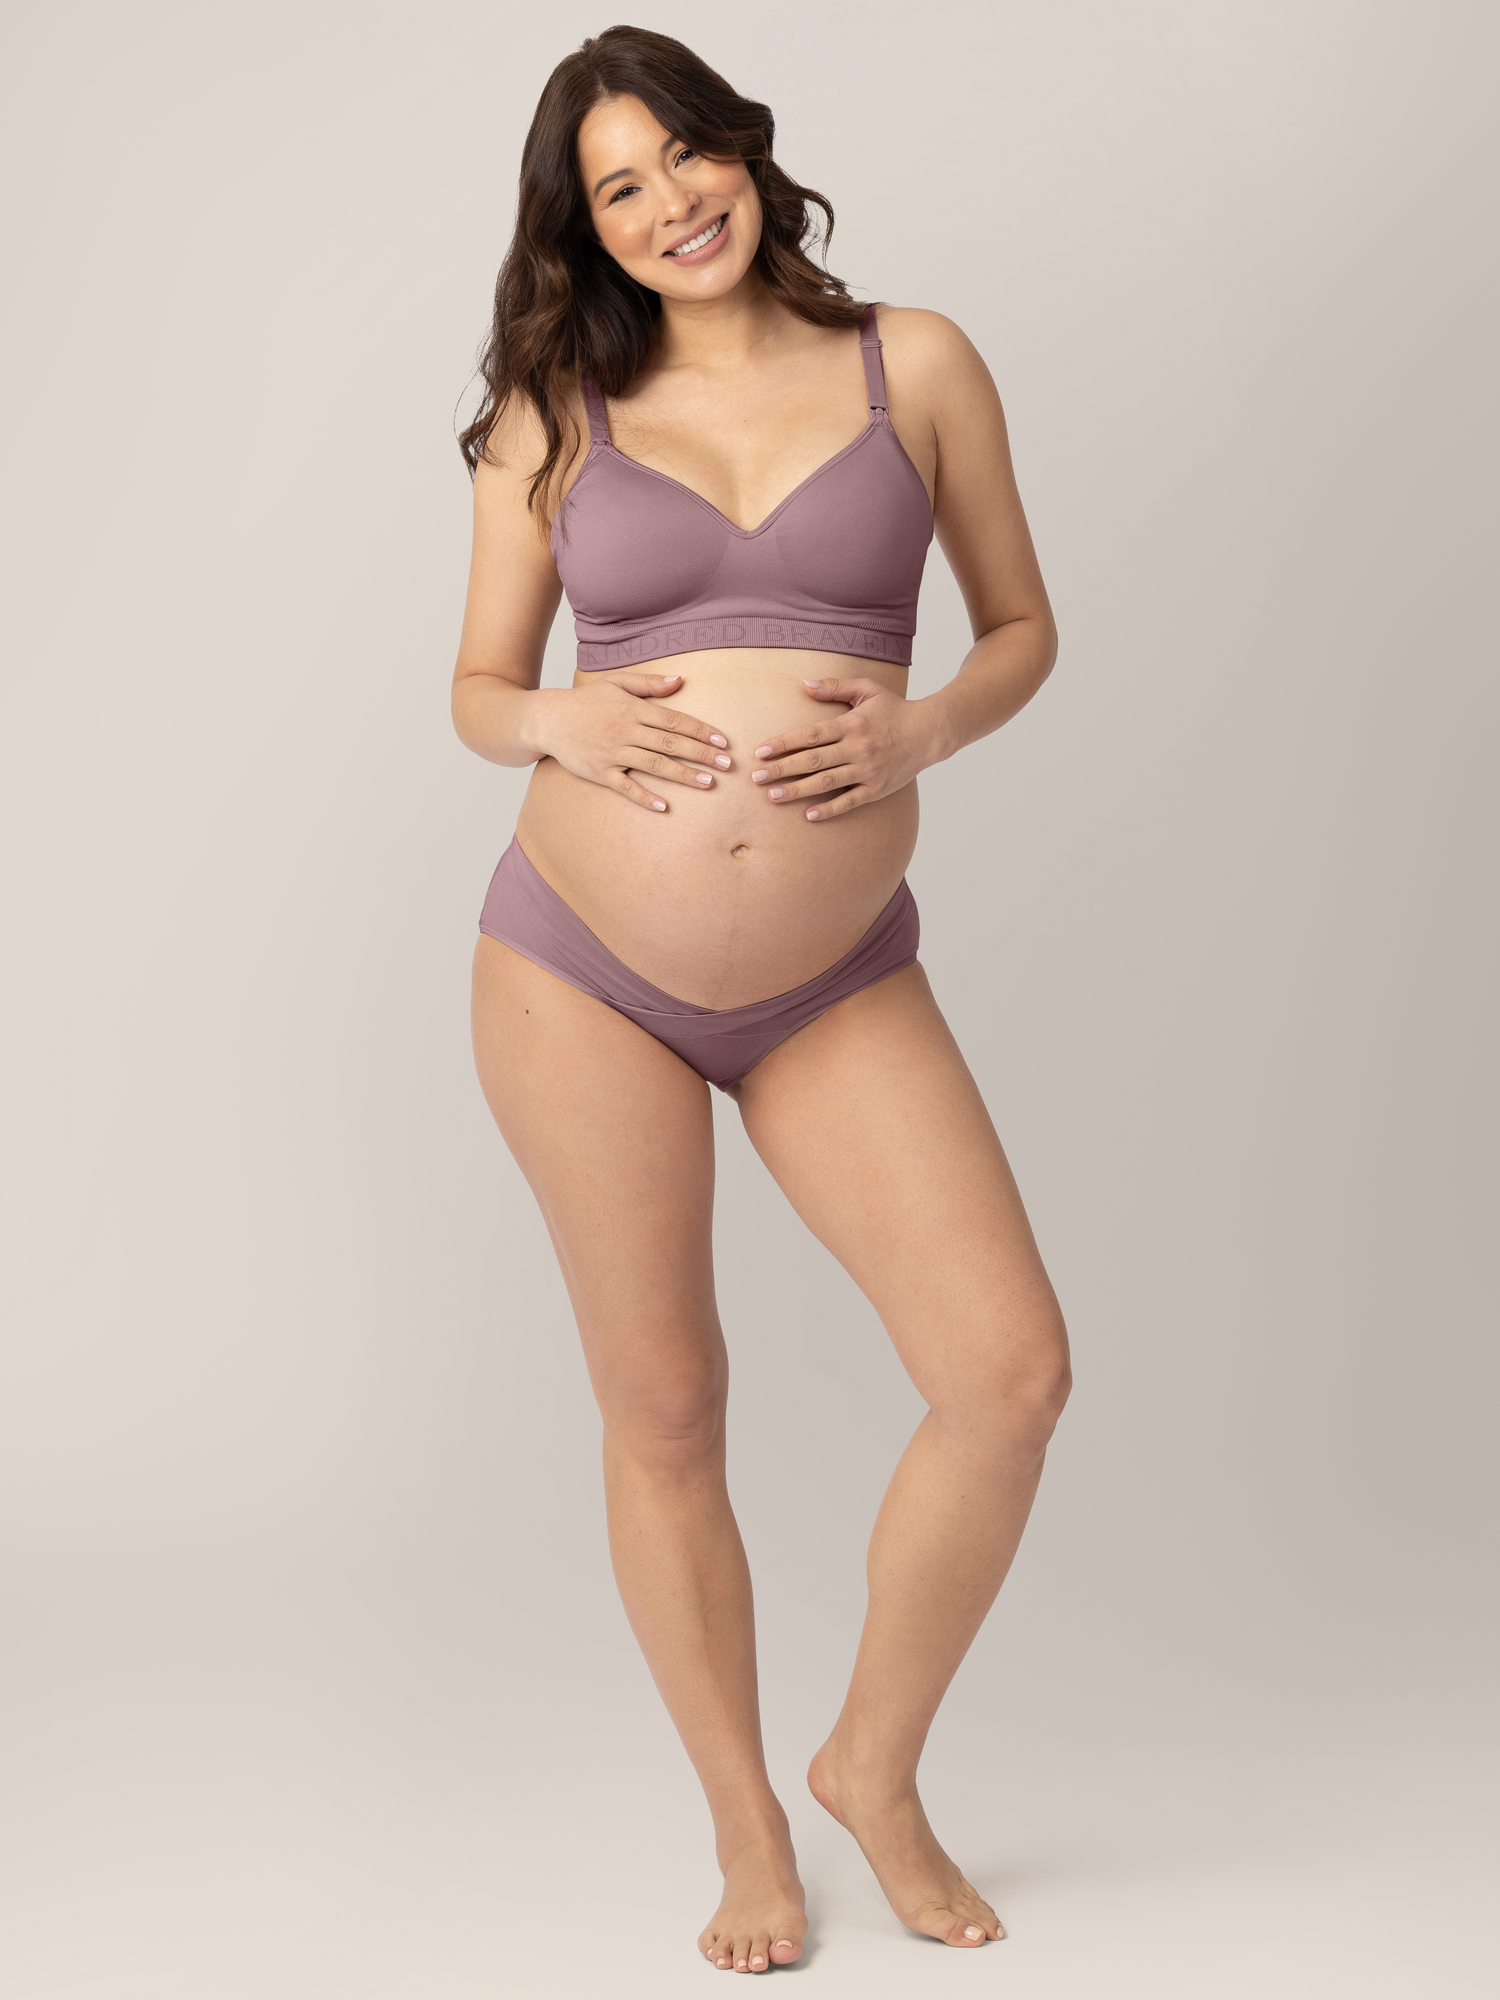 Pregnant model wearing the Under-the-Bump Bikini Underwear in assorted colors holding her belly. @model_info:Vanessa is wearing a Small. 